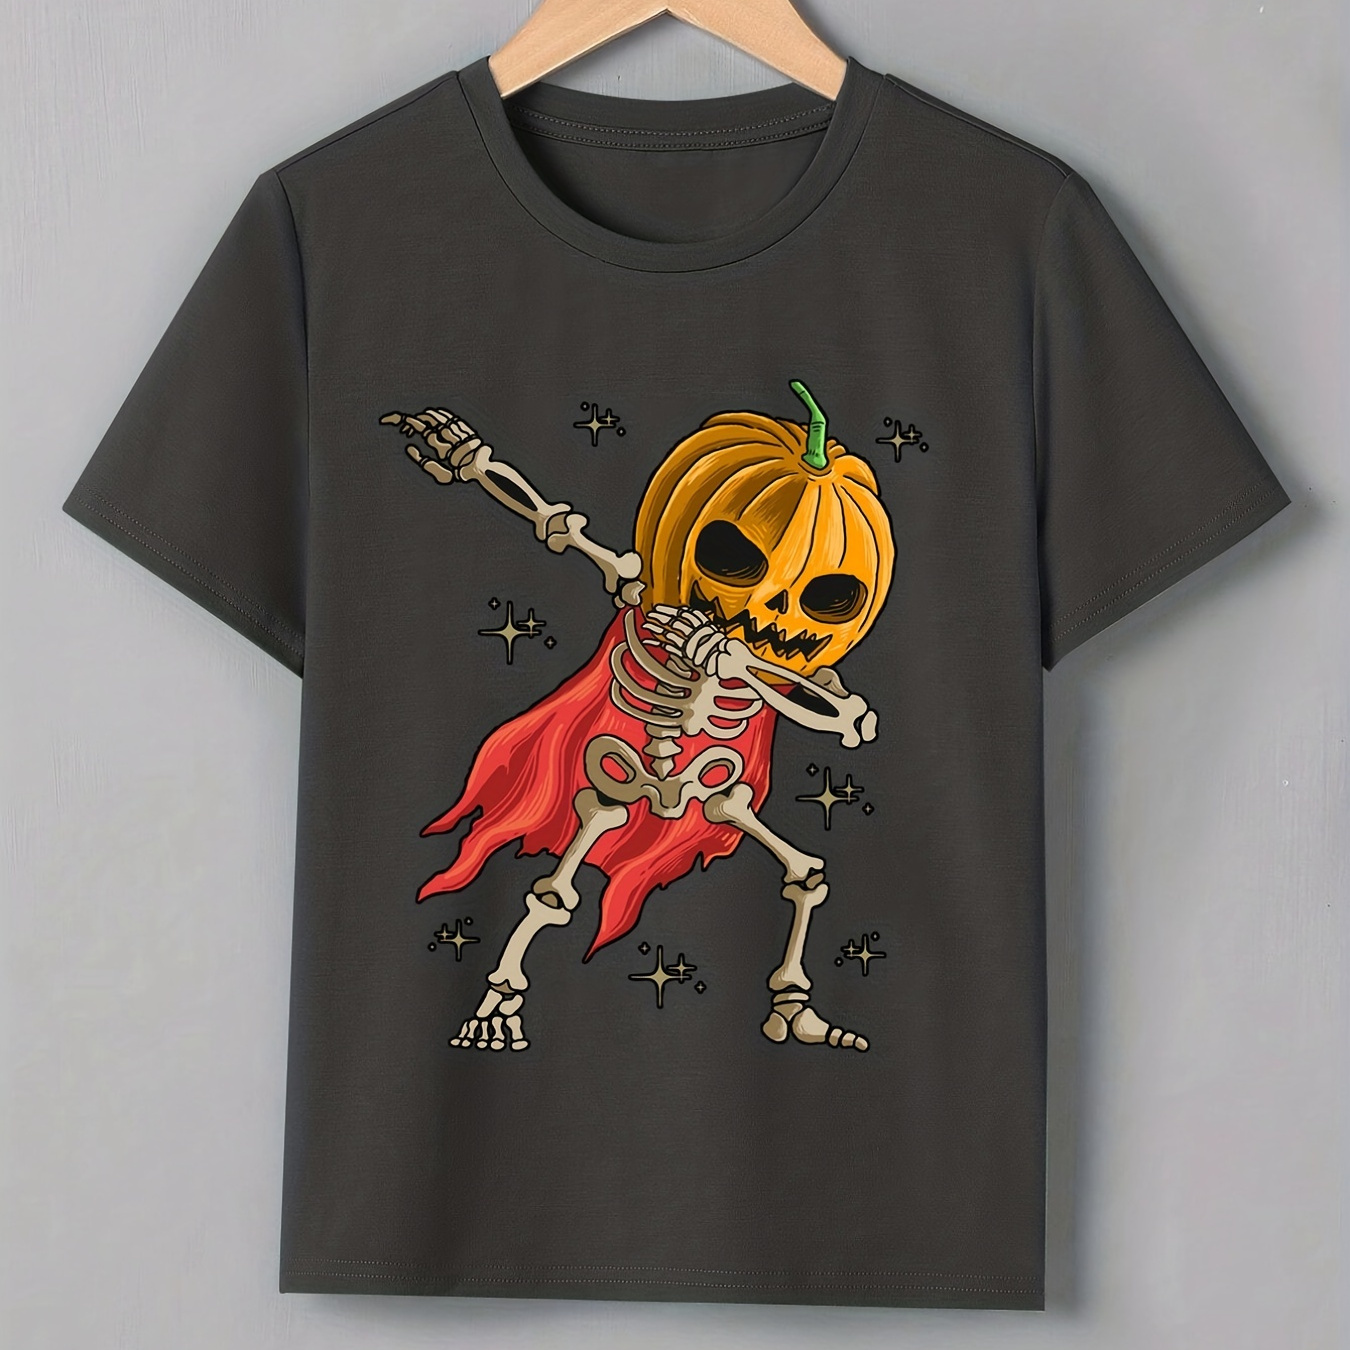 

Halloween Pumpkin Skeleton Print T Shirt, Tees For Kids Boys, Casual Short Sleeve T-shirt For Summer Spring Fall, Tops As Gifts